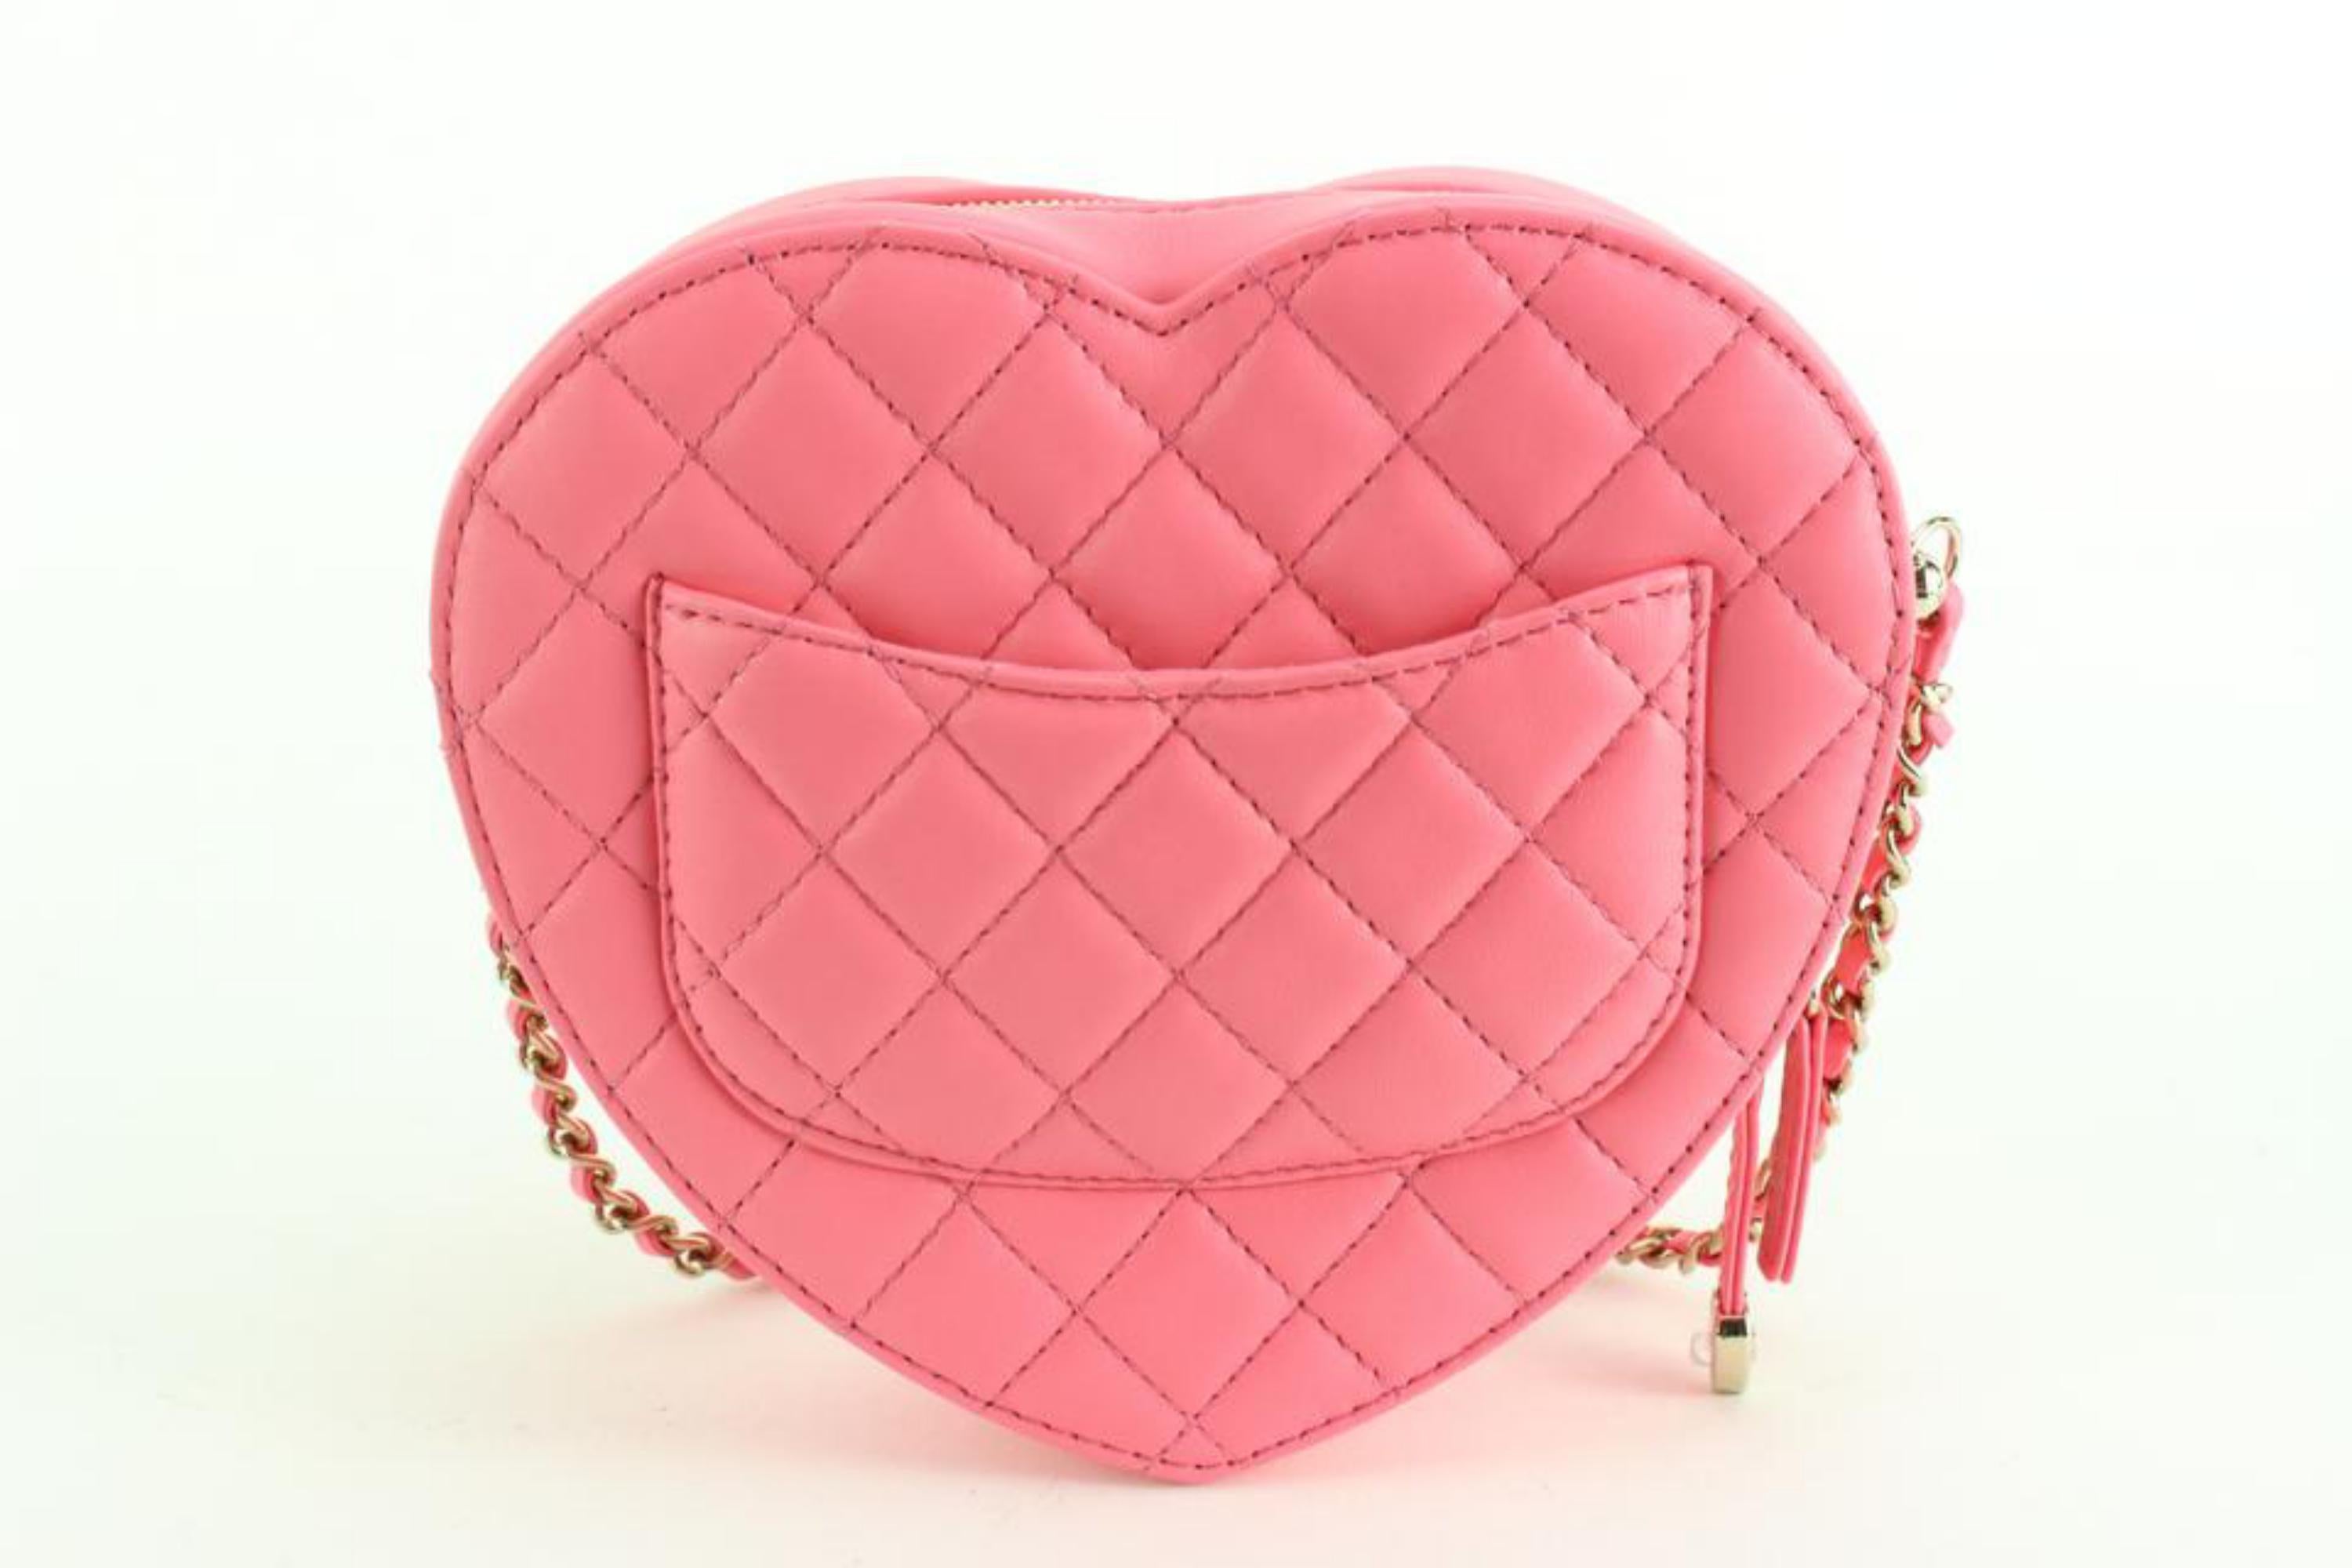 Chanel Coral Pink Quilted Lambskin CC In Love Heart Flap Bag Large 70cz56s 1